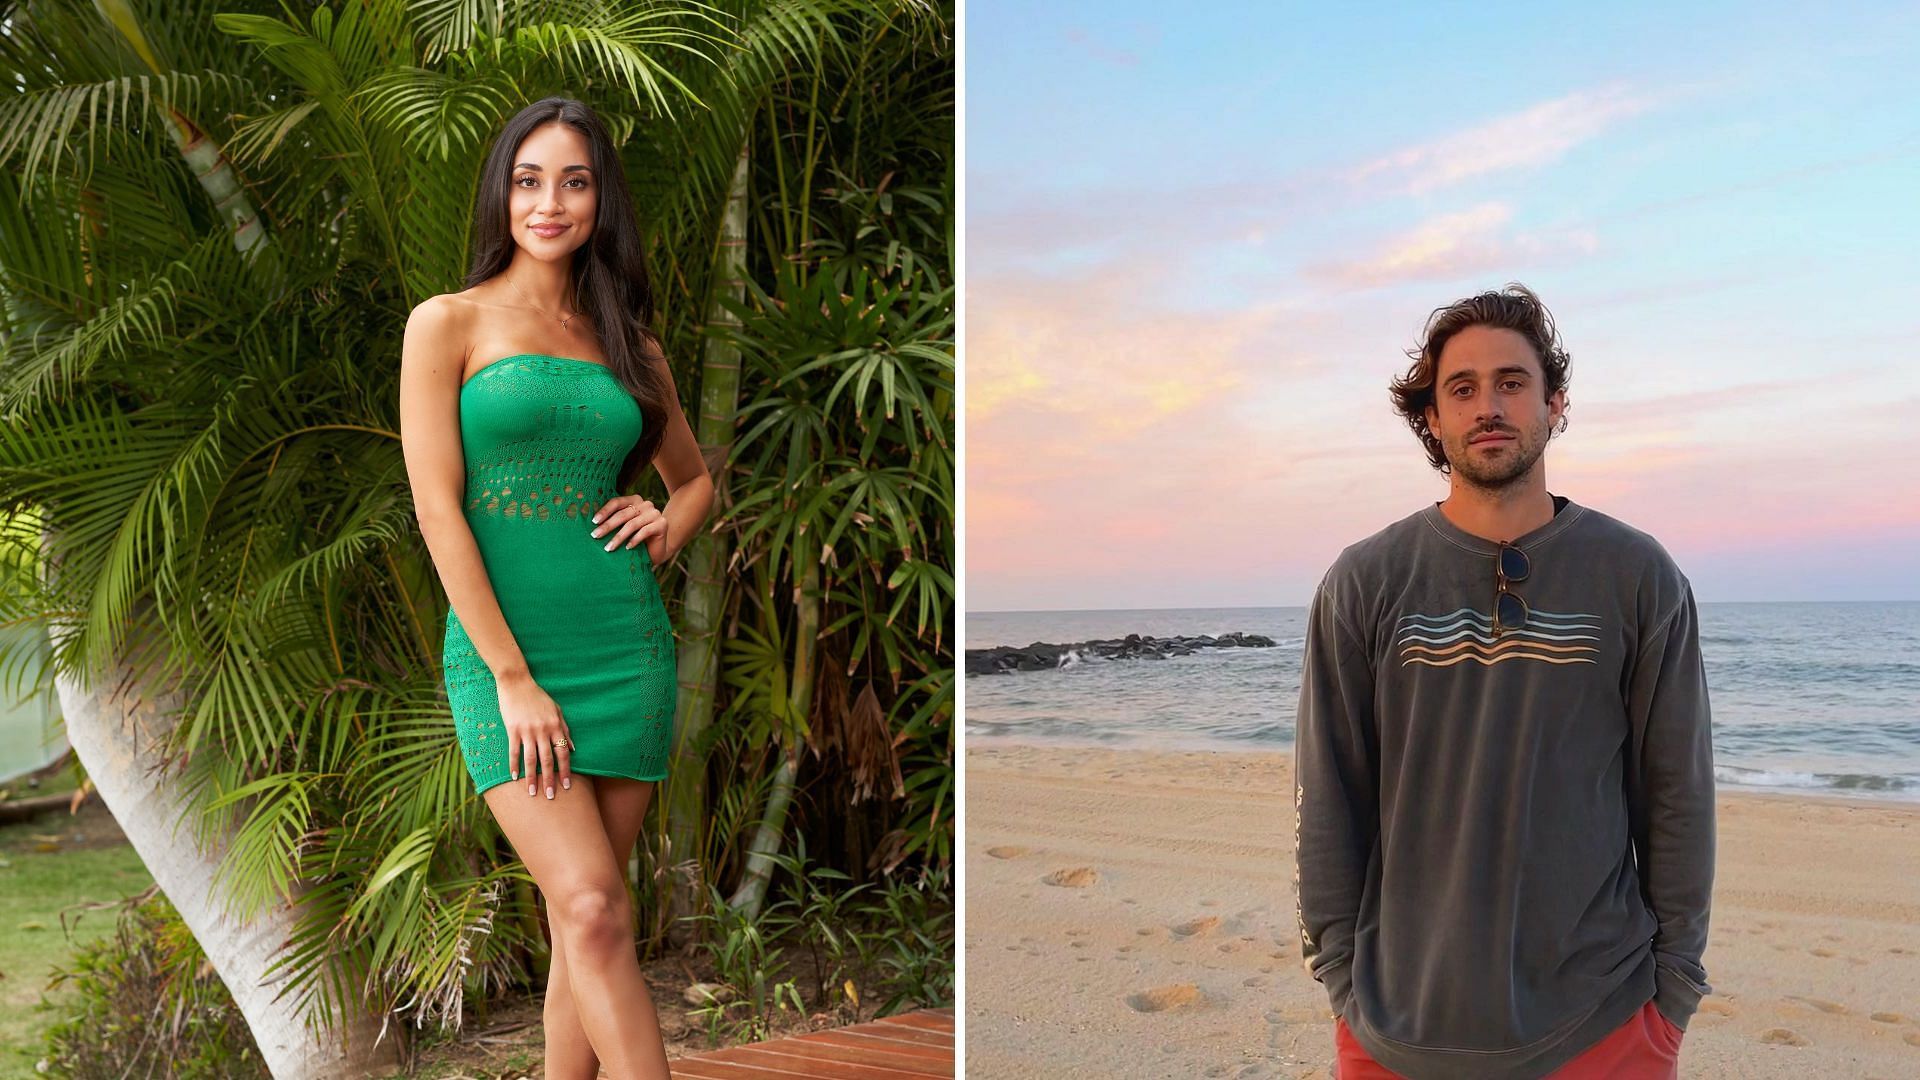 Victoria confirms her relationship with Greg Grippo on Bachelor in Paradise